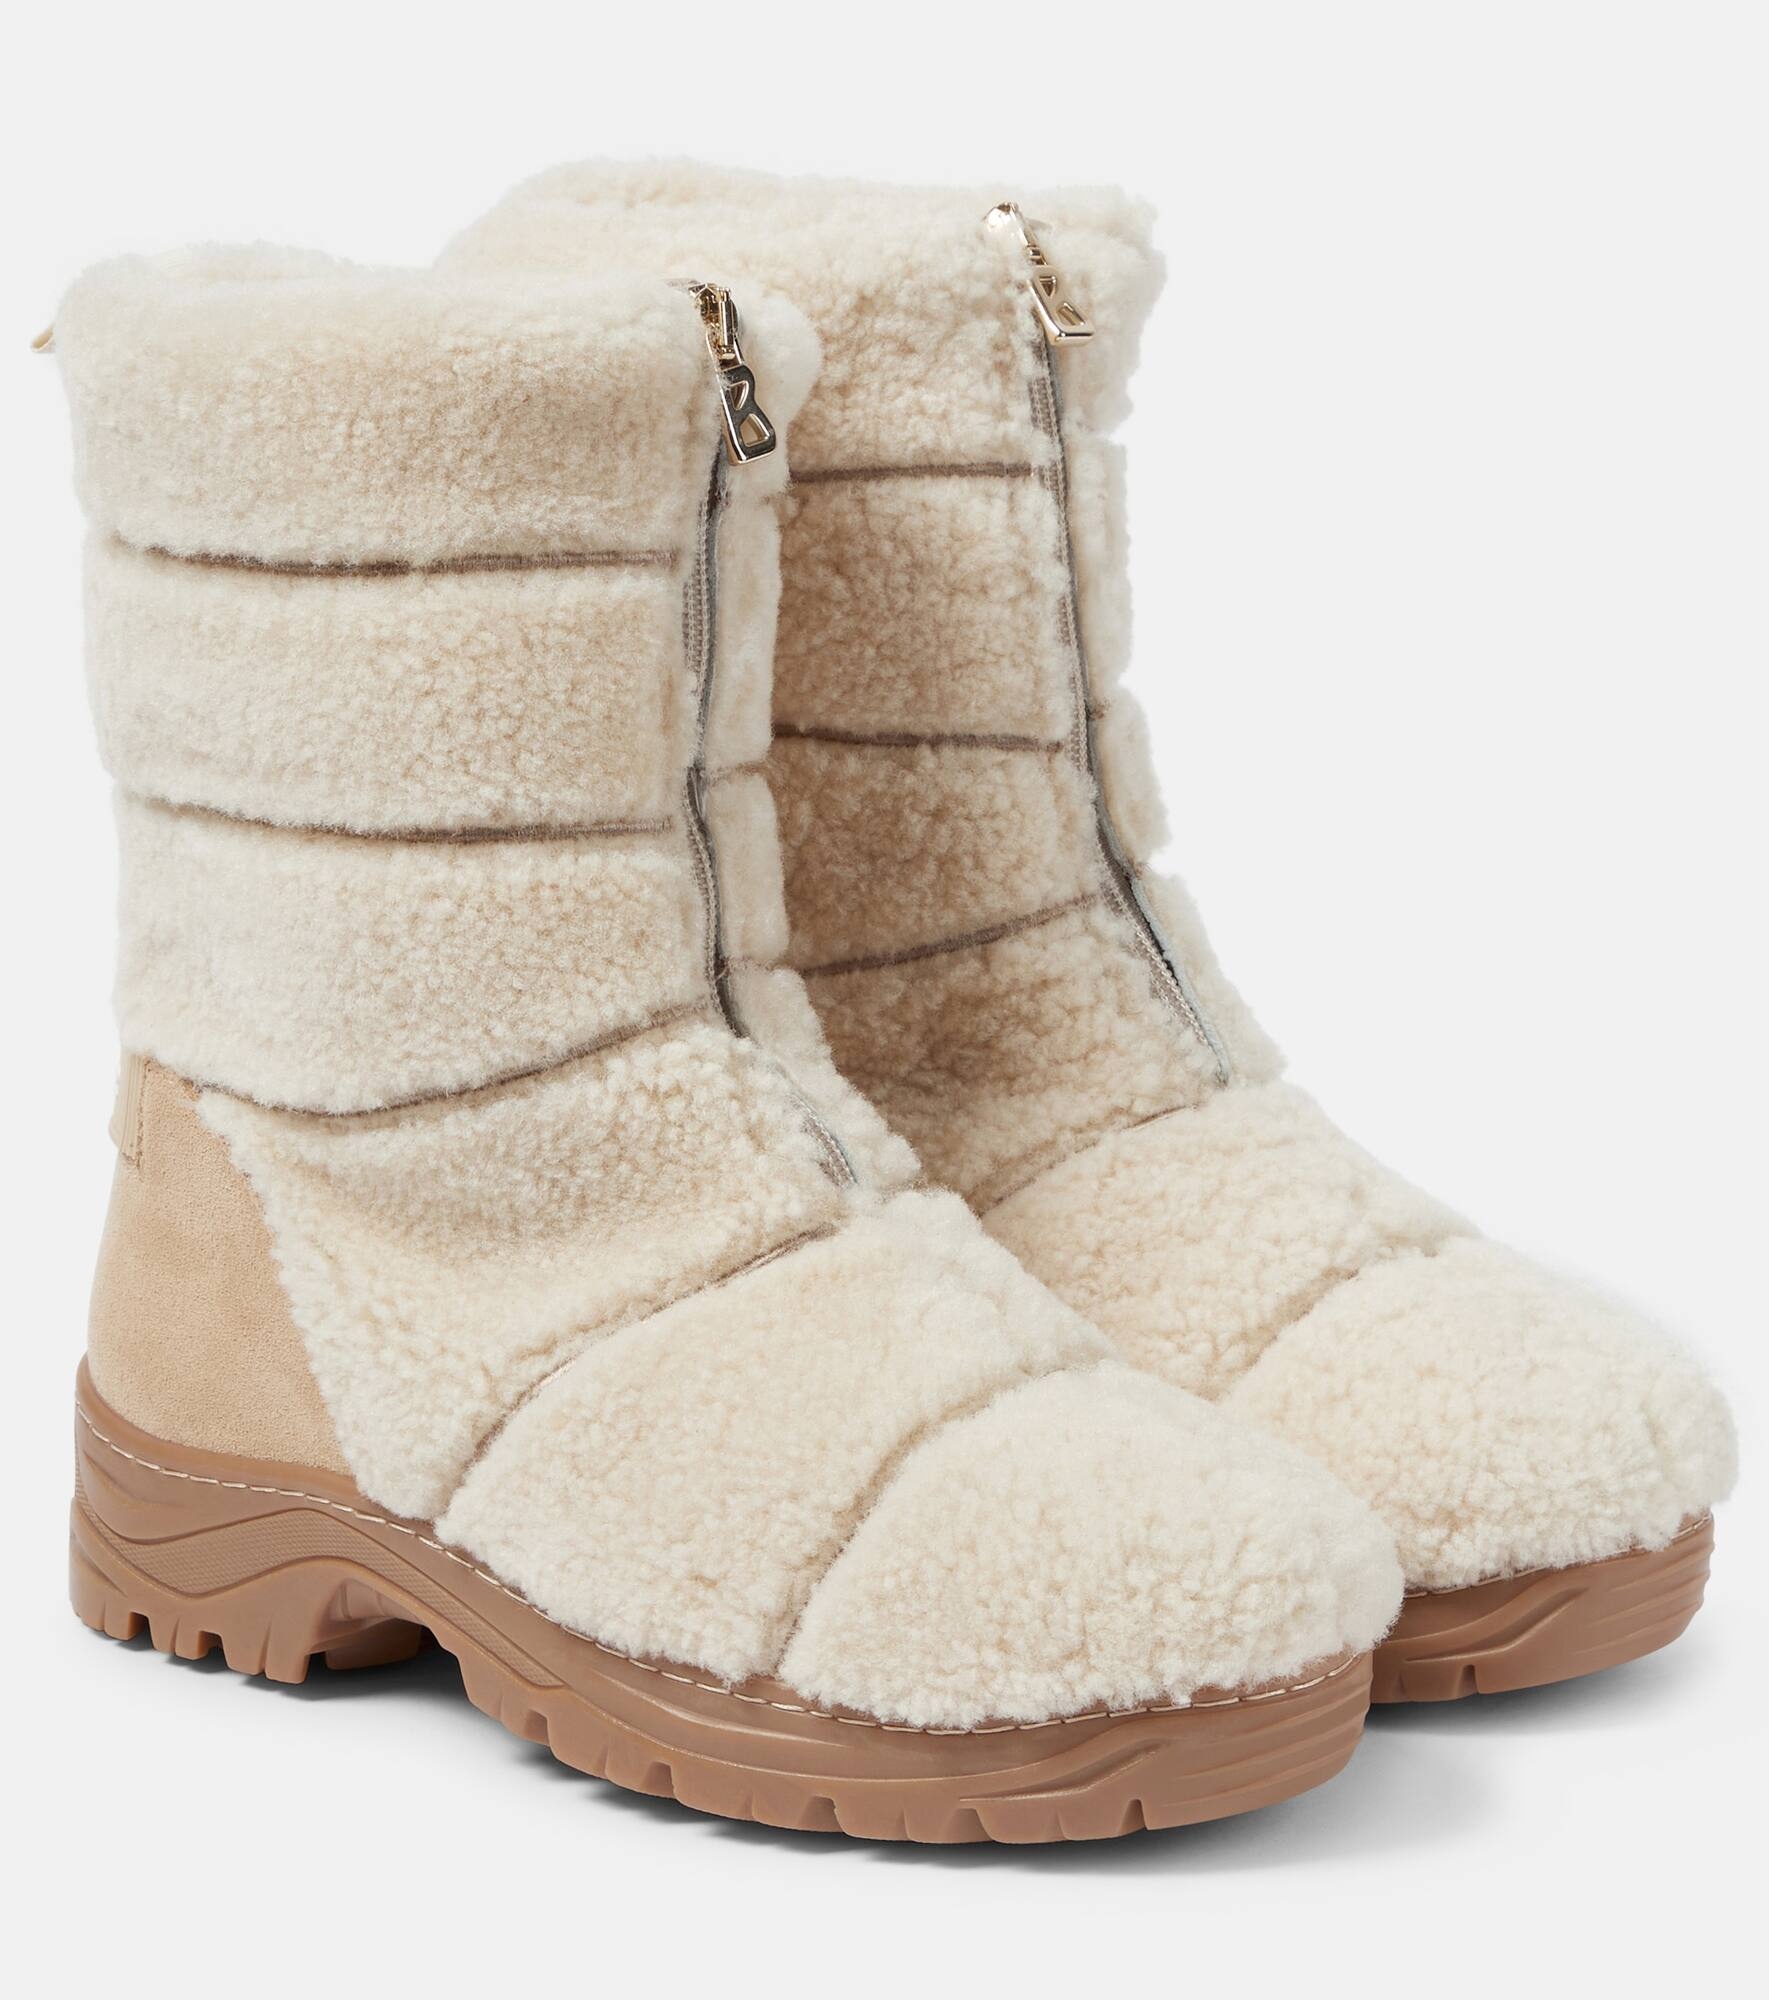 Alta Badia 6 shearling ankle boots - 1